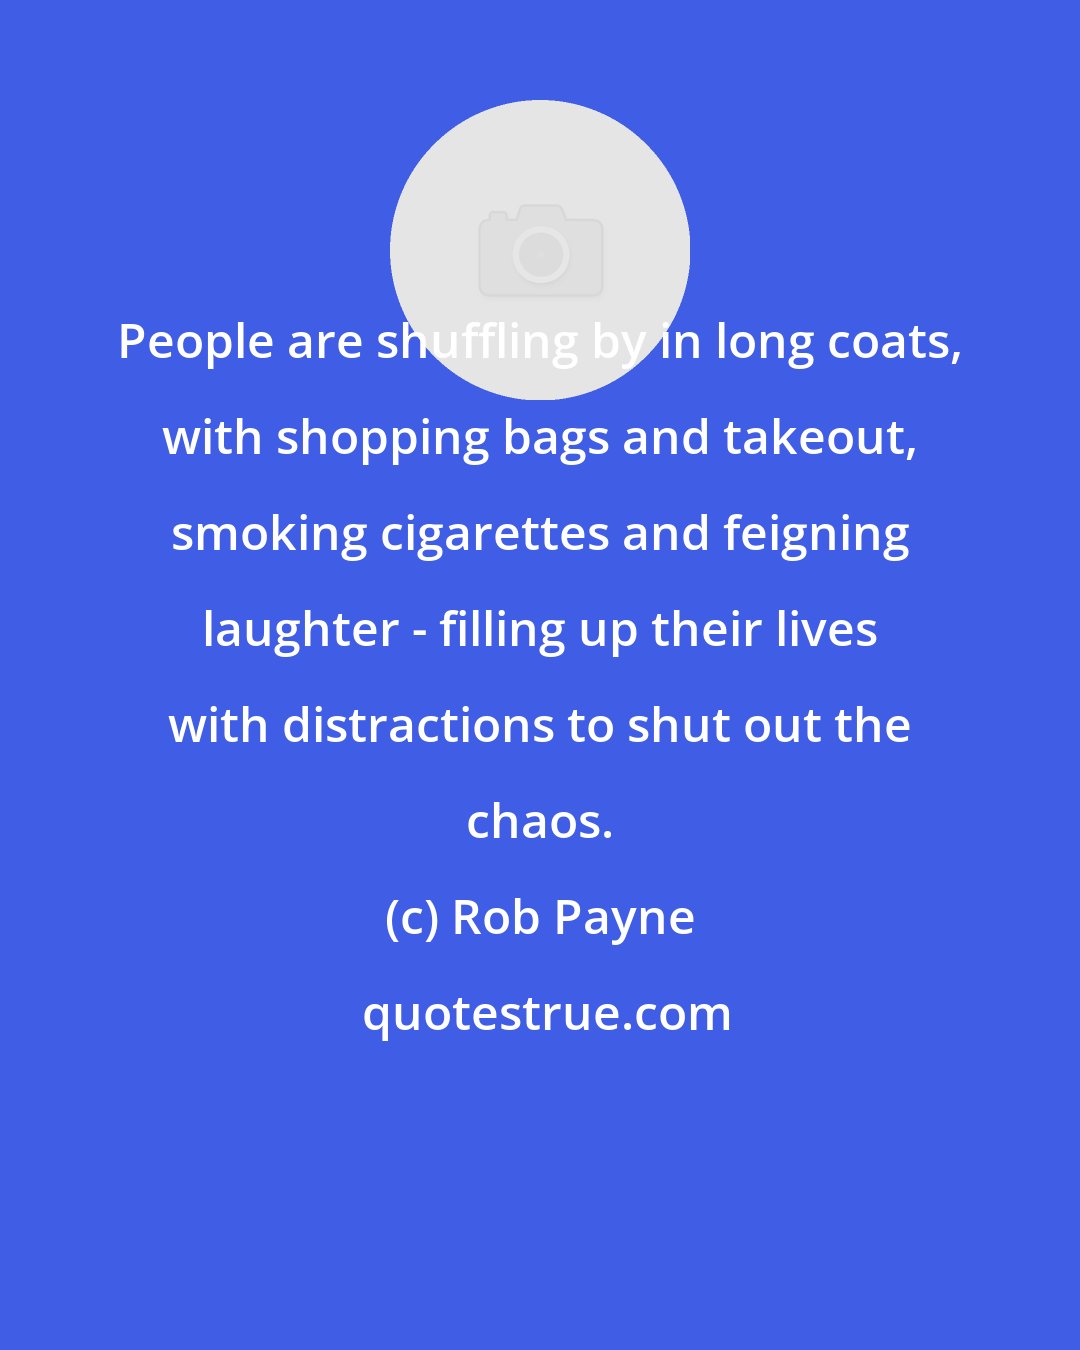 Rob Payne: People are shuffling by in long coats, with shopping bags and takeout, smoking cigarettes and feigning laughter - filling up their lives with distractions to shut out the chaos.